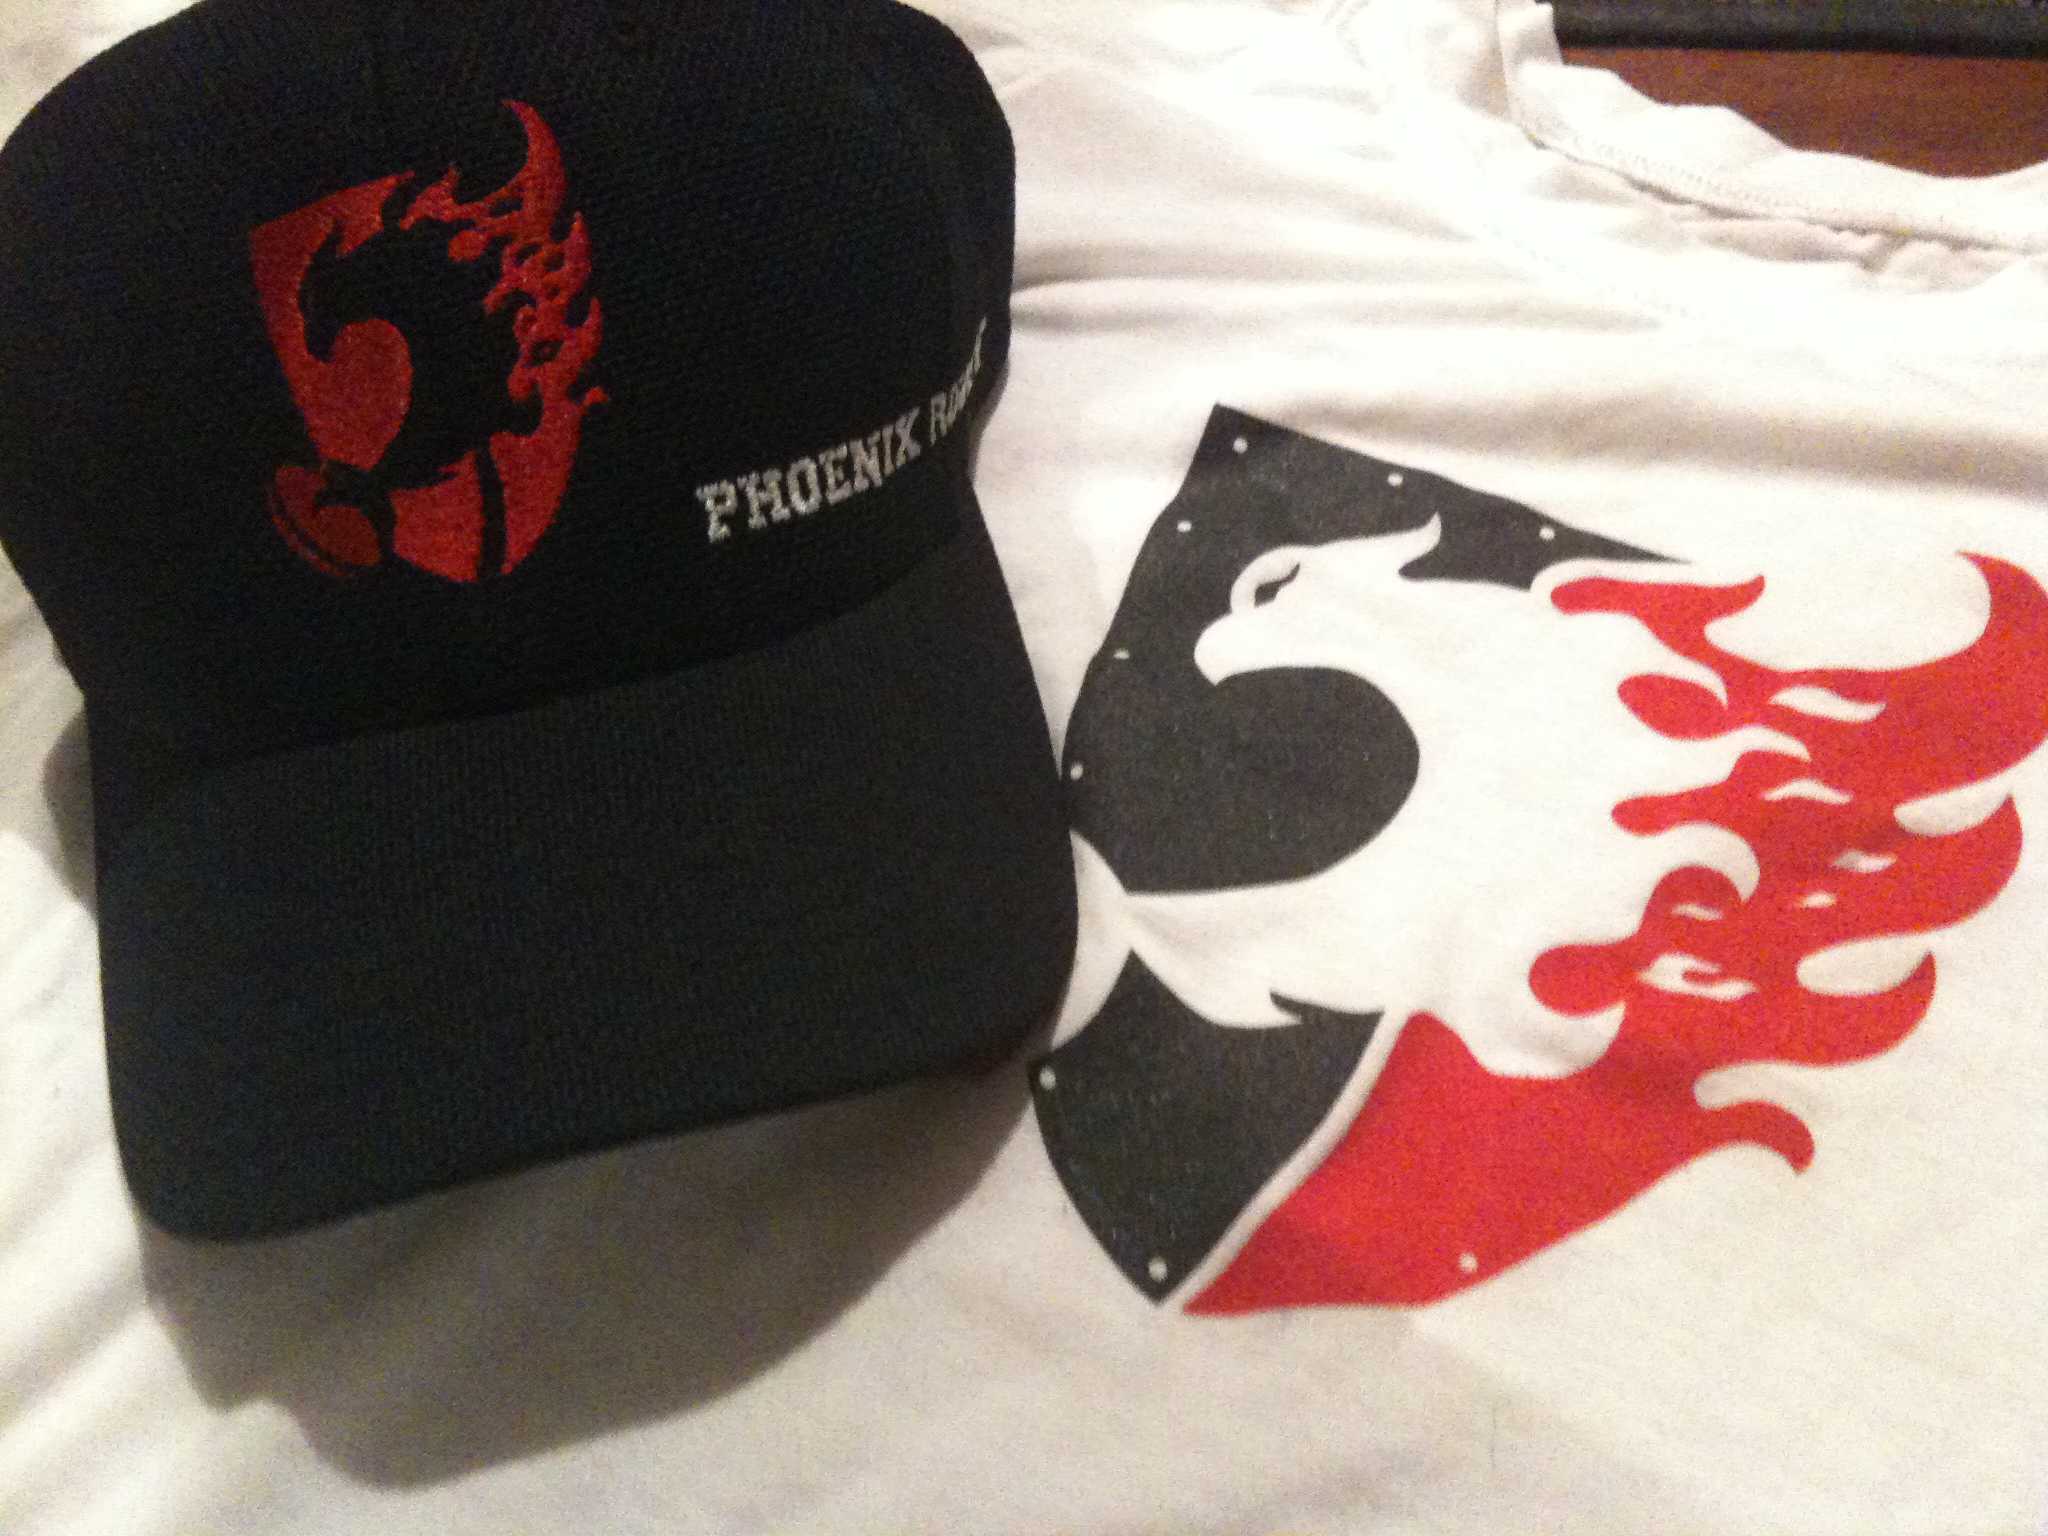 Phoenix rugby team embroidered hats and dry fit shirts